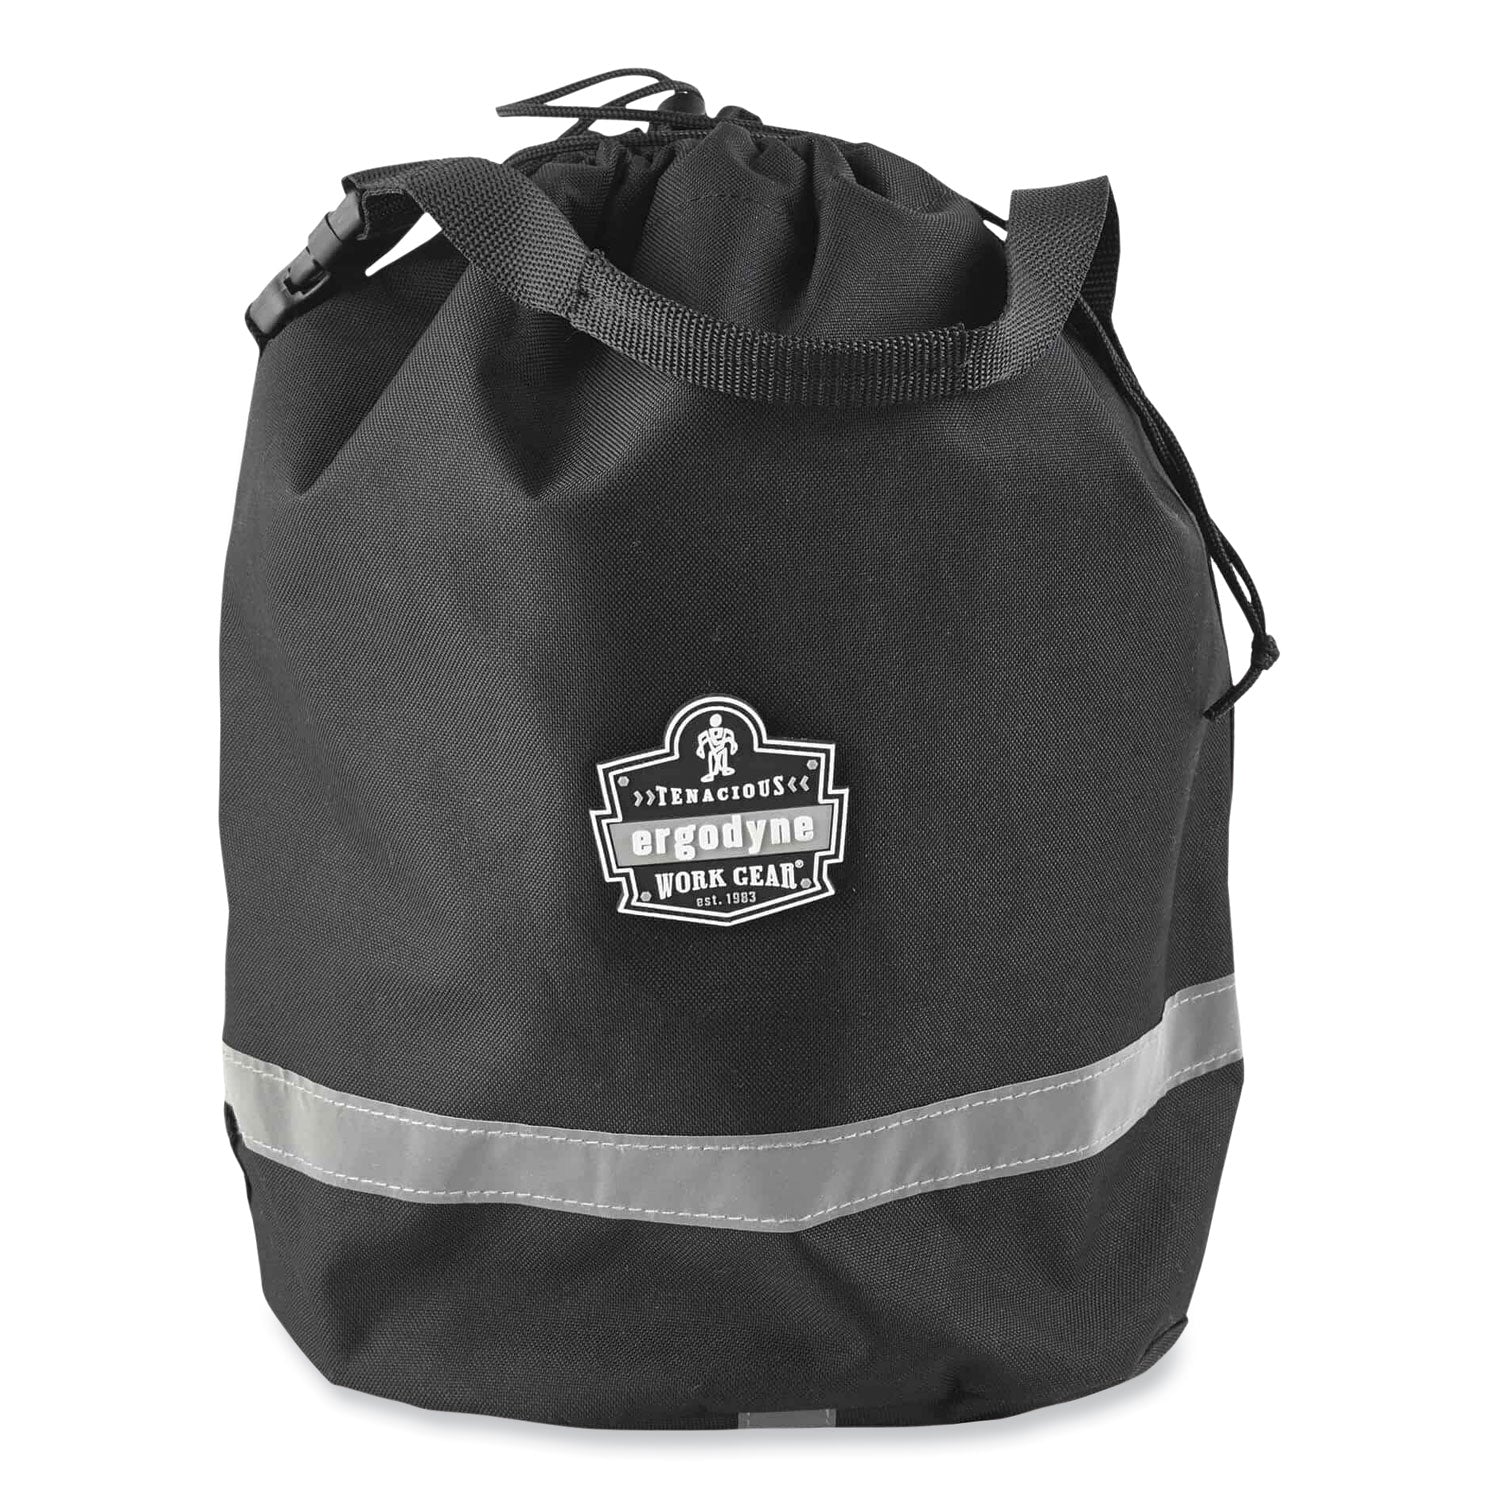 arsenal-5130-fall-protection-bag-10-x-10-x-15-black-ships-in-1-3-business-days_ego13130 - 1